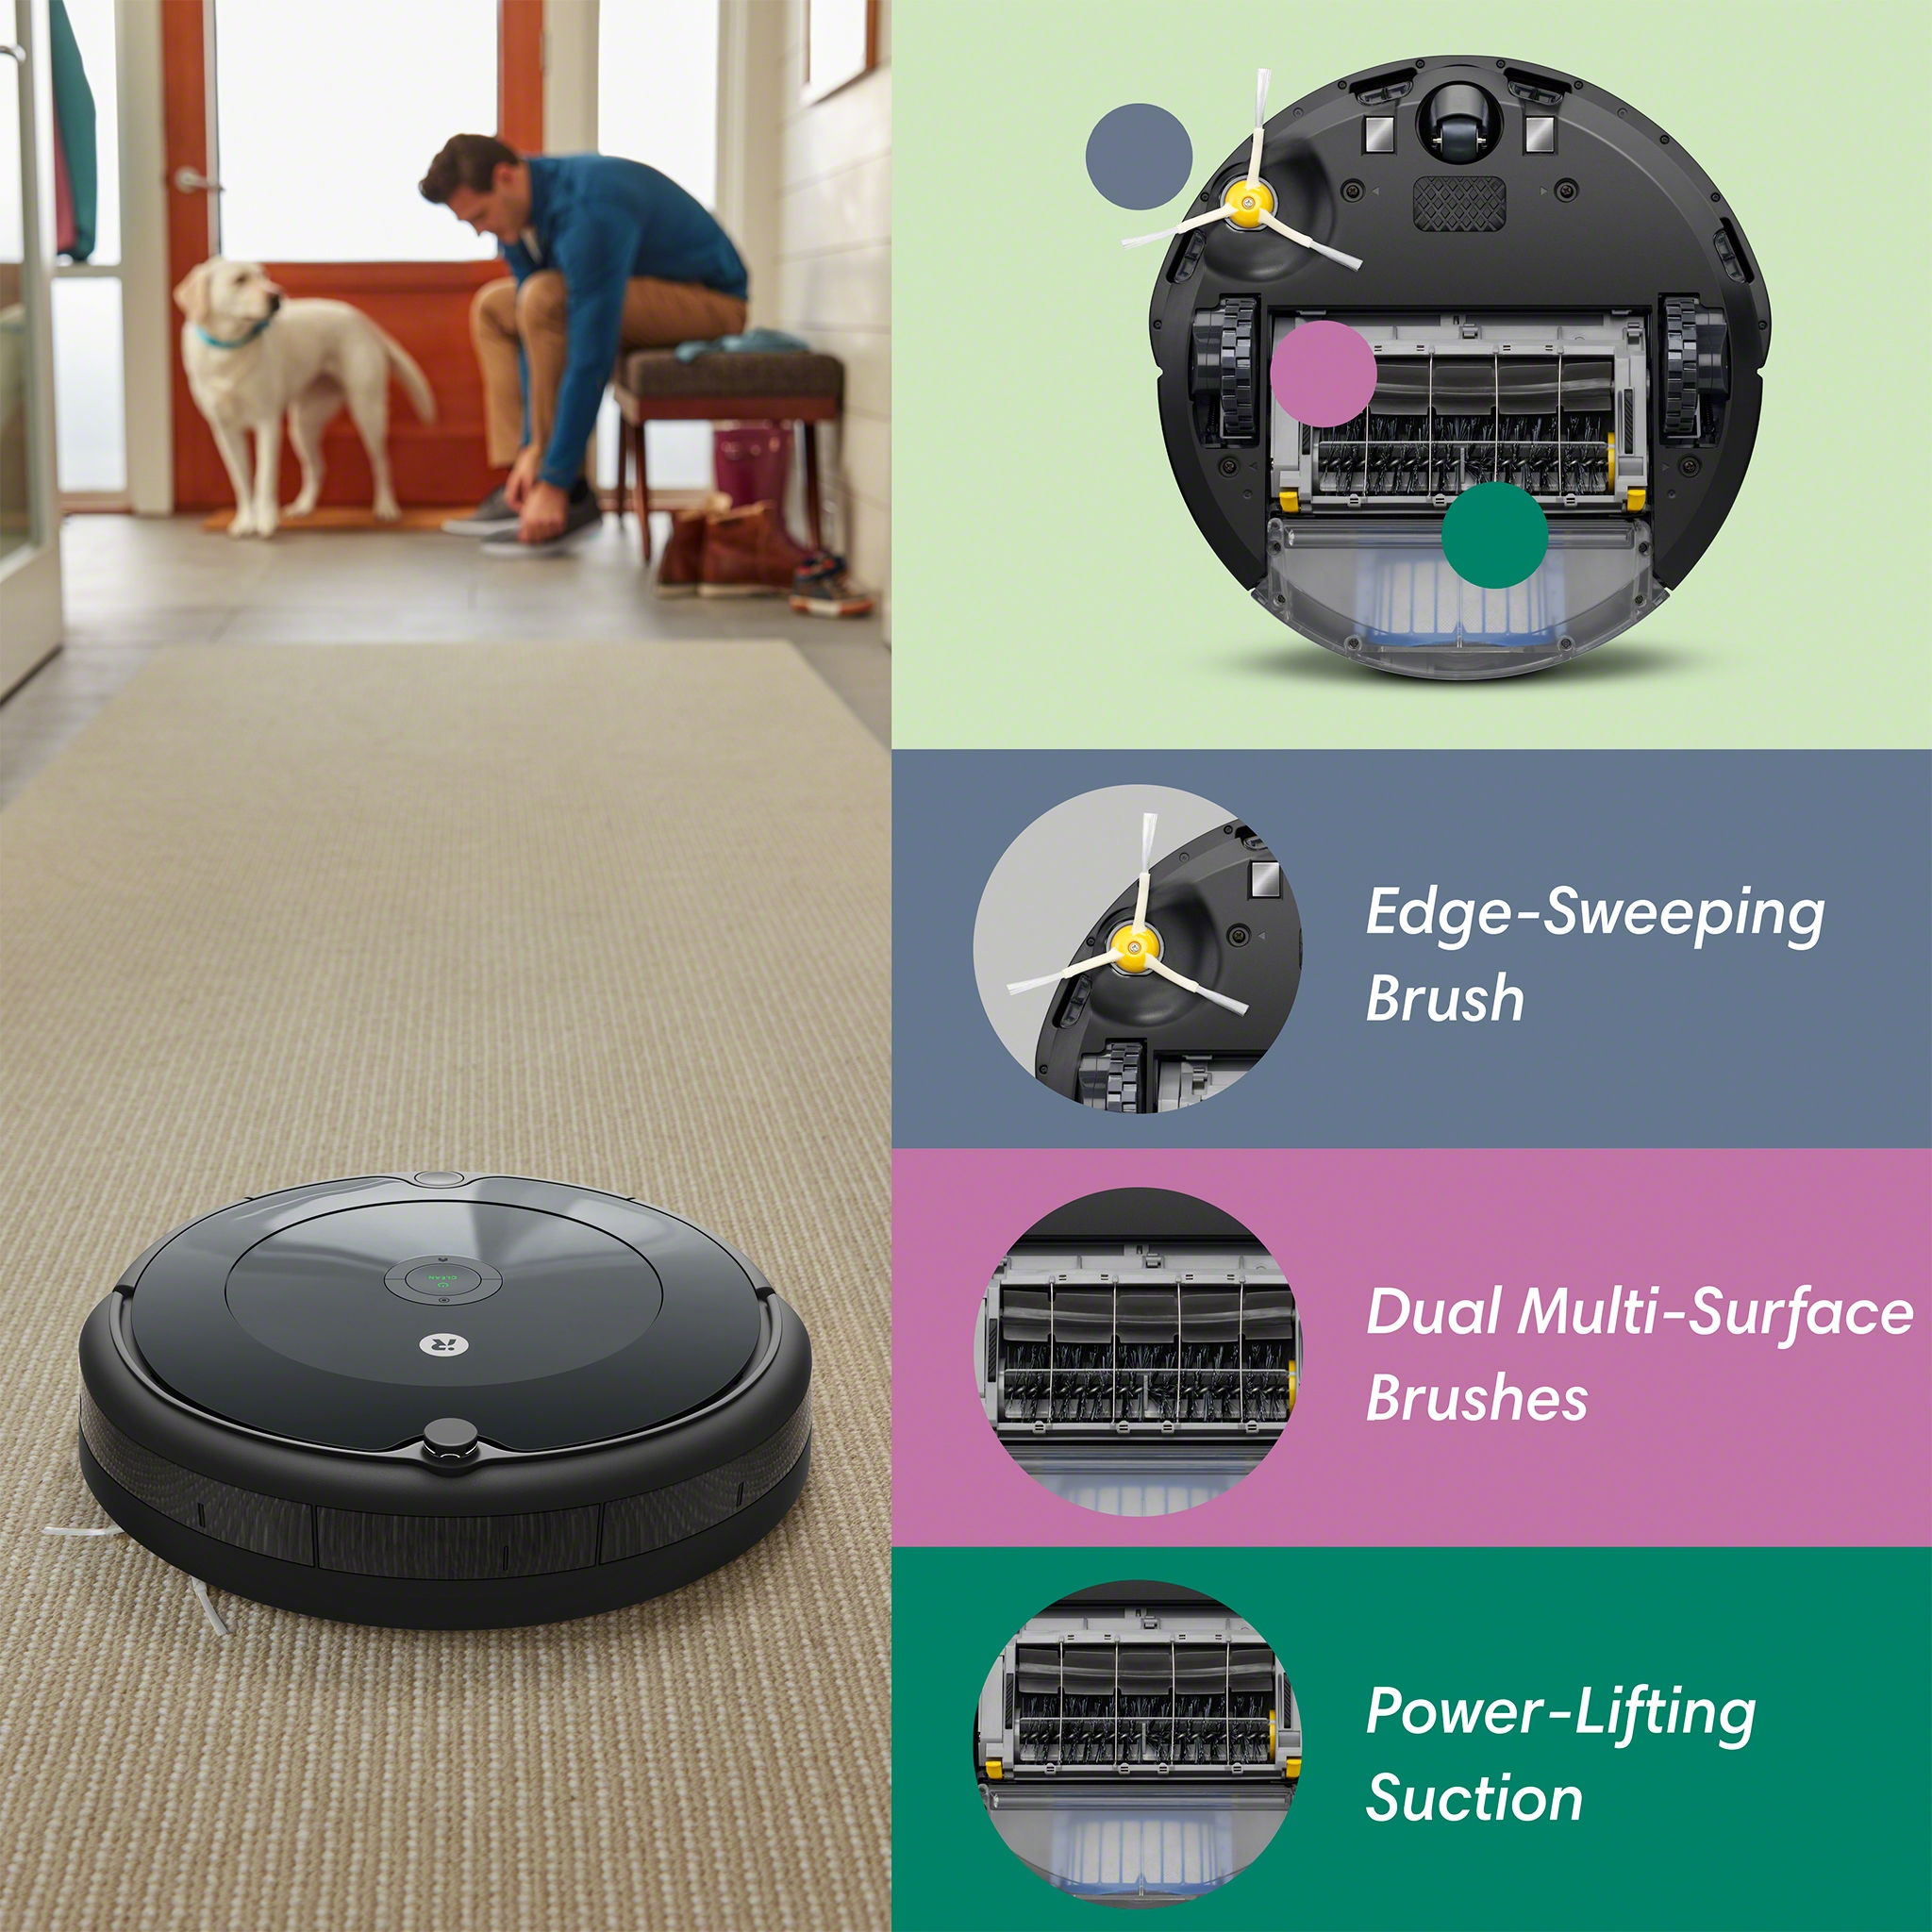 iRobot® Roomba® 676 Robot Vacuum-Wi-Fi Connectivity, Personalized Cleaning Recommendations, Works with Google, Good for Pet Hair, Carpets, Hard Floors, Self-Charging - image 4 of 16